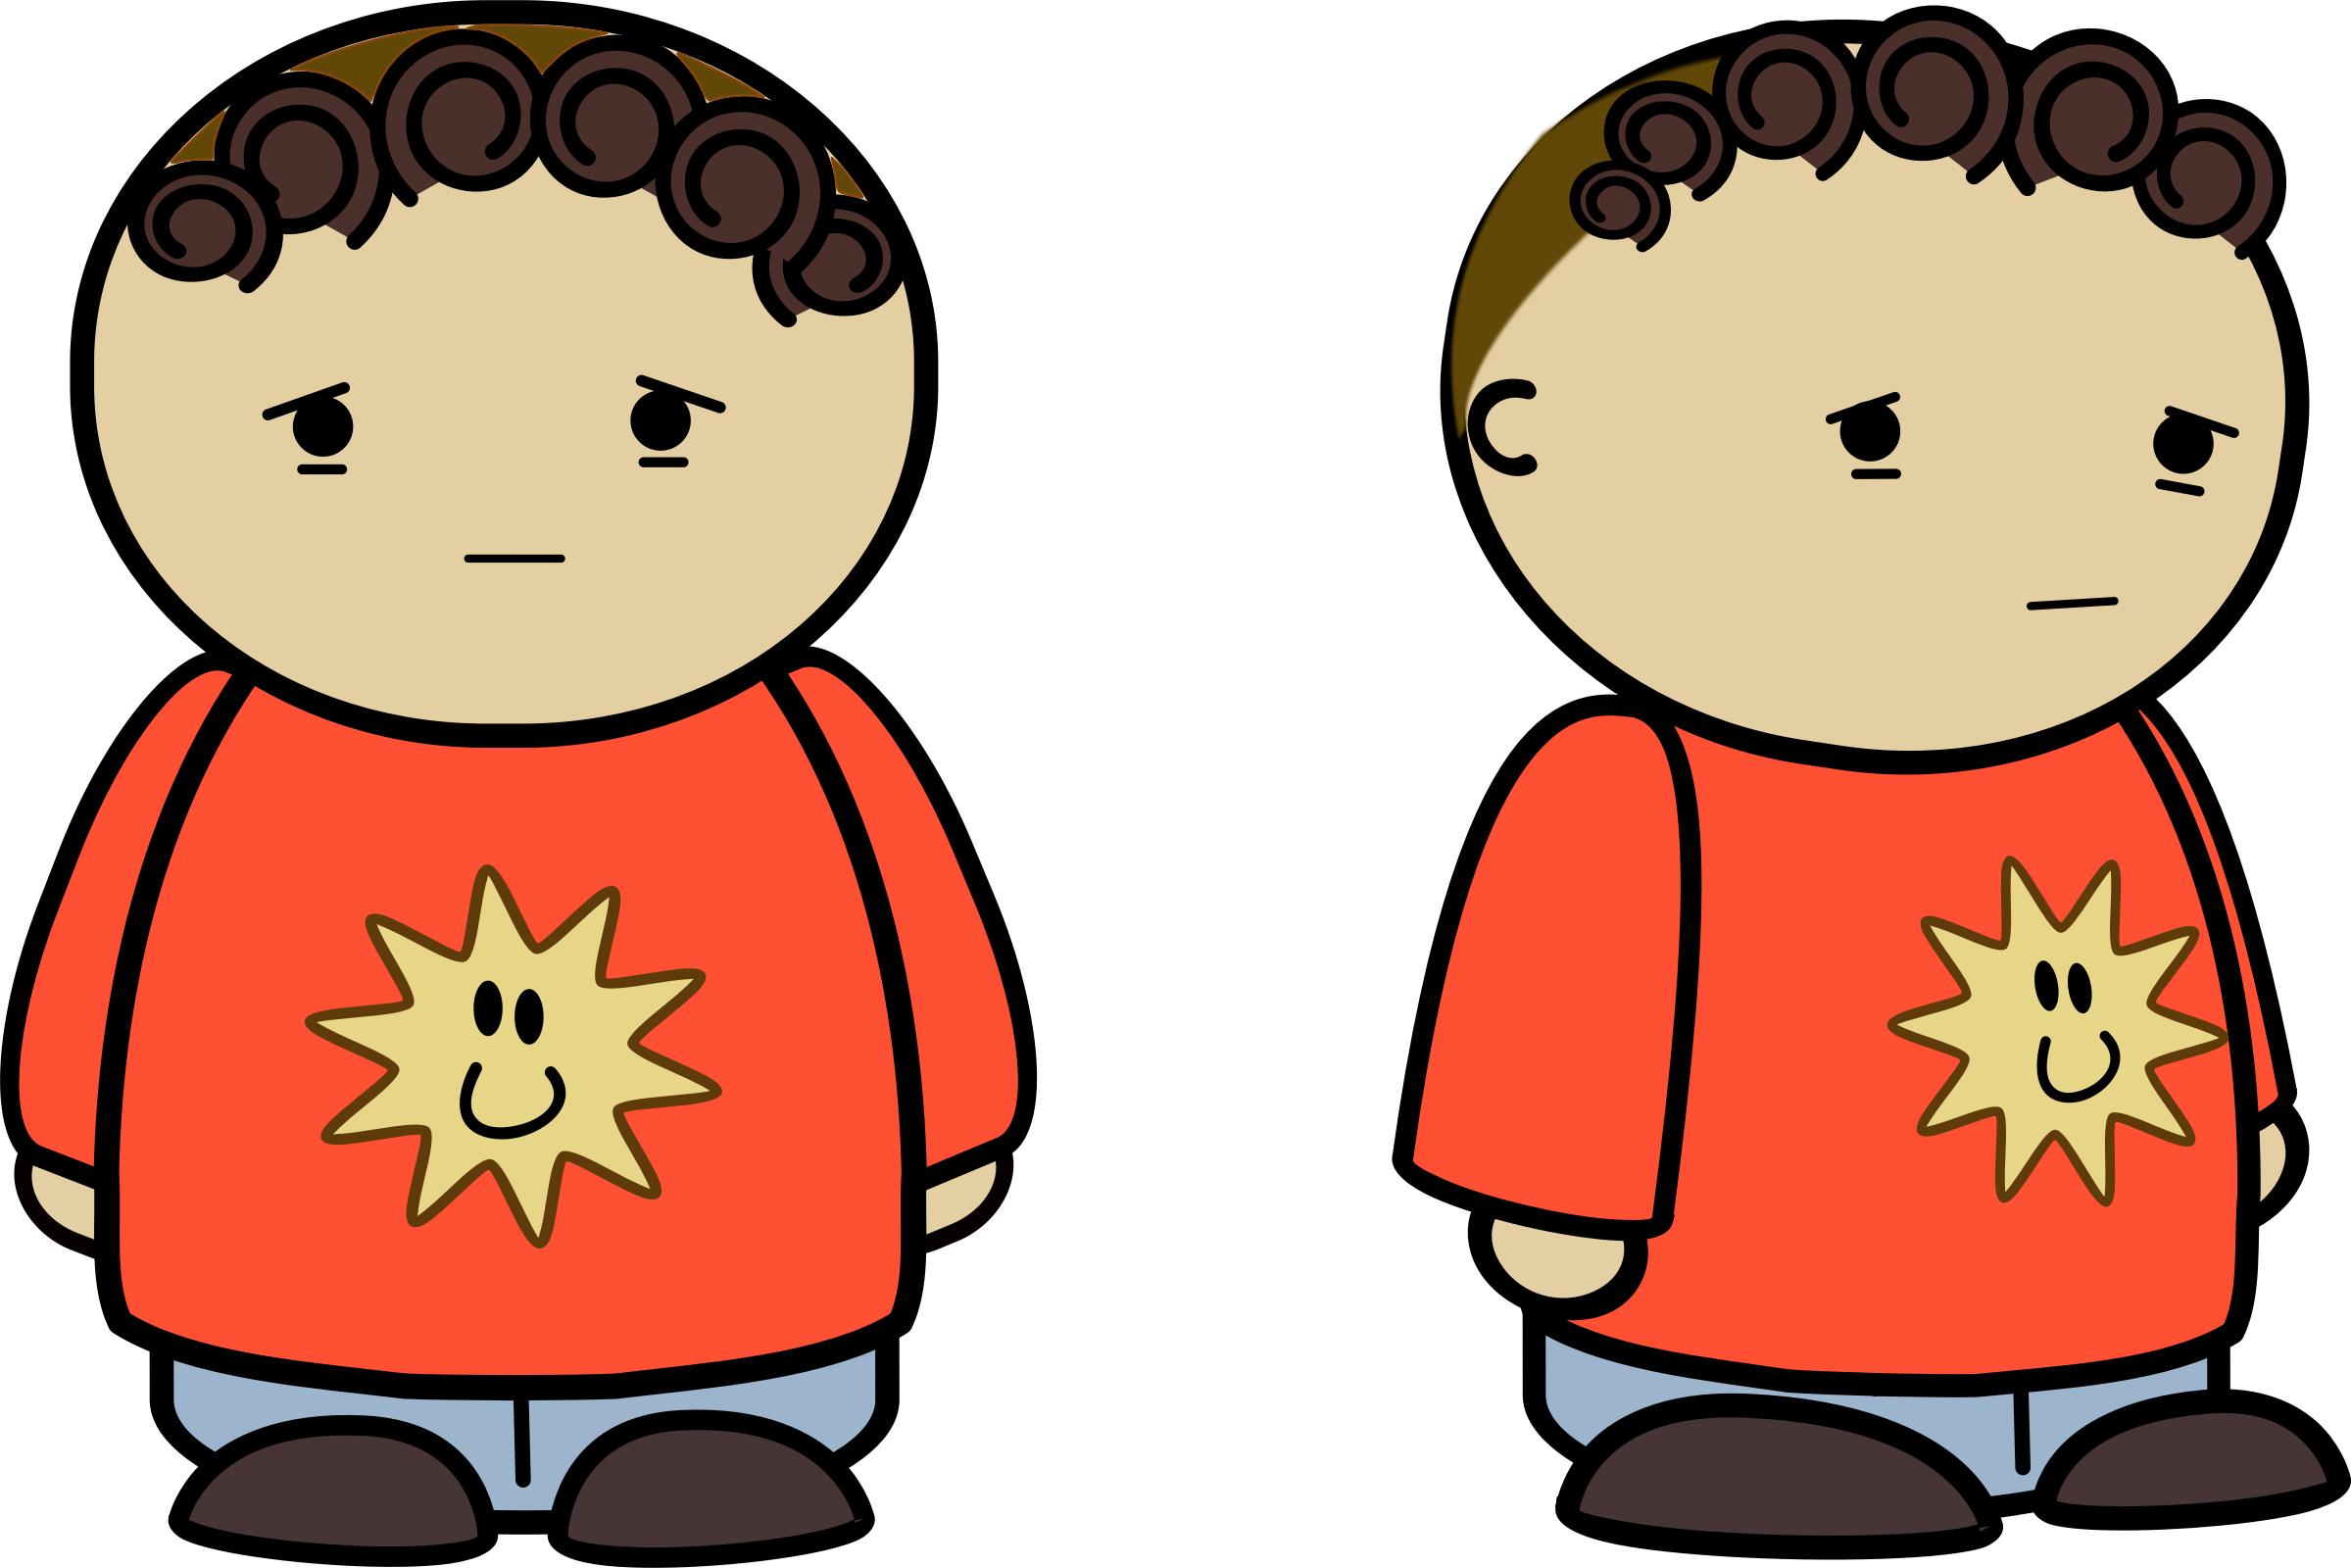 Miserable - Mix and math comic character PNG icons